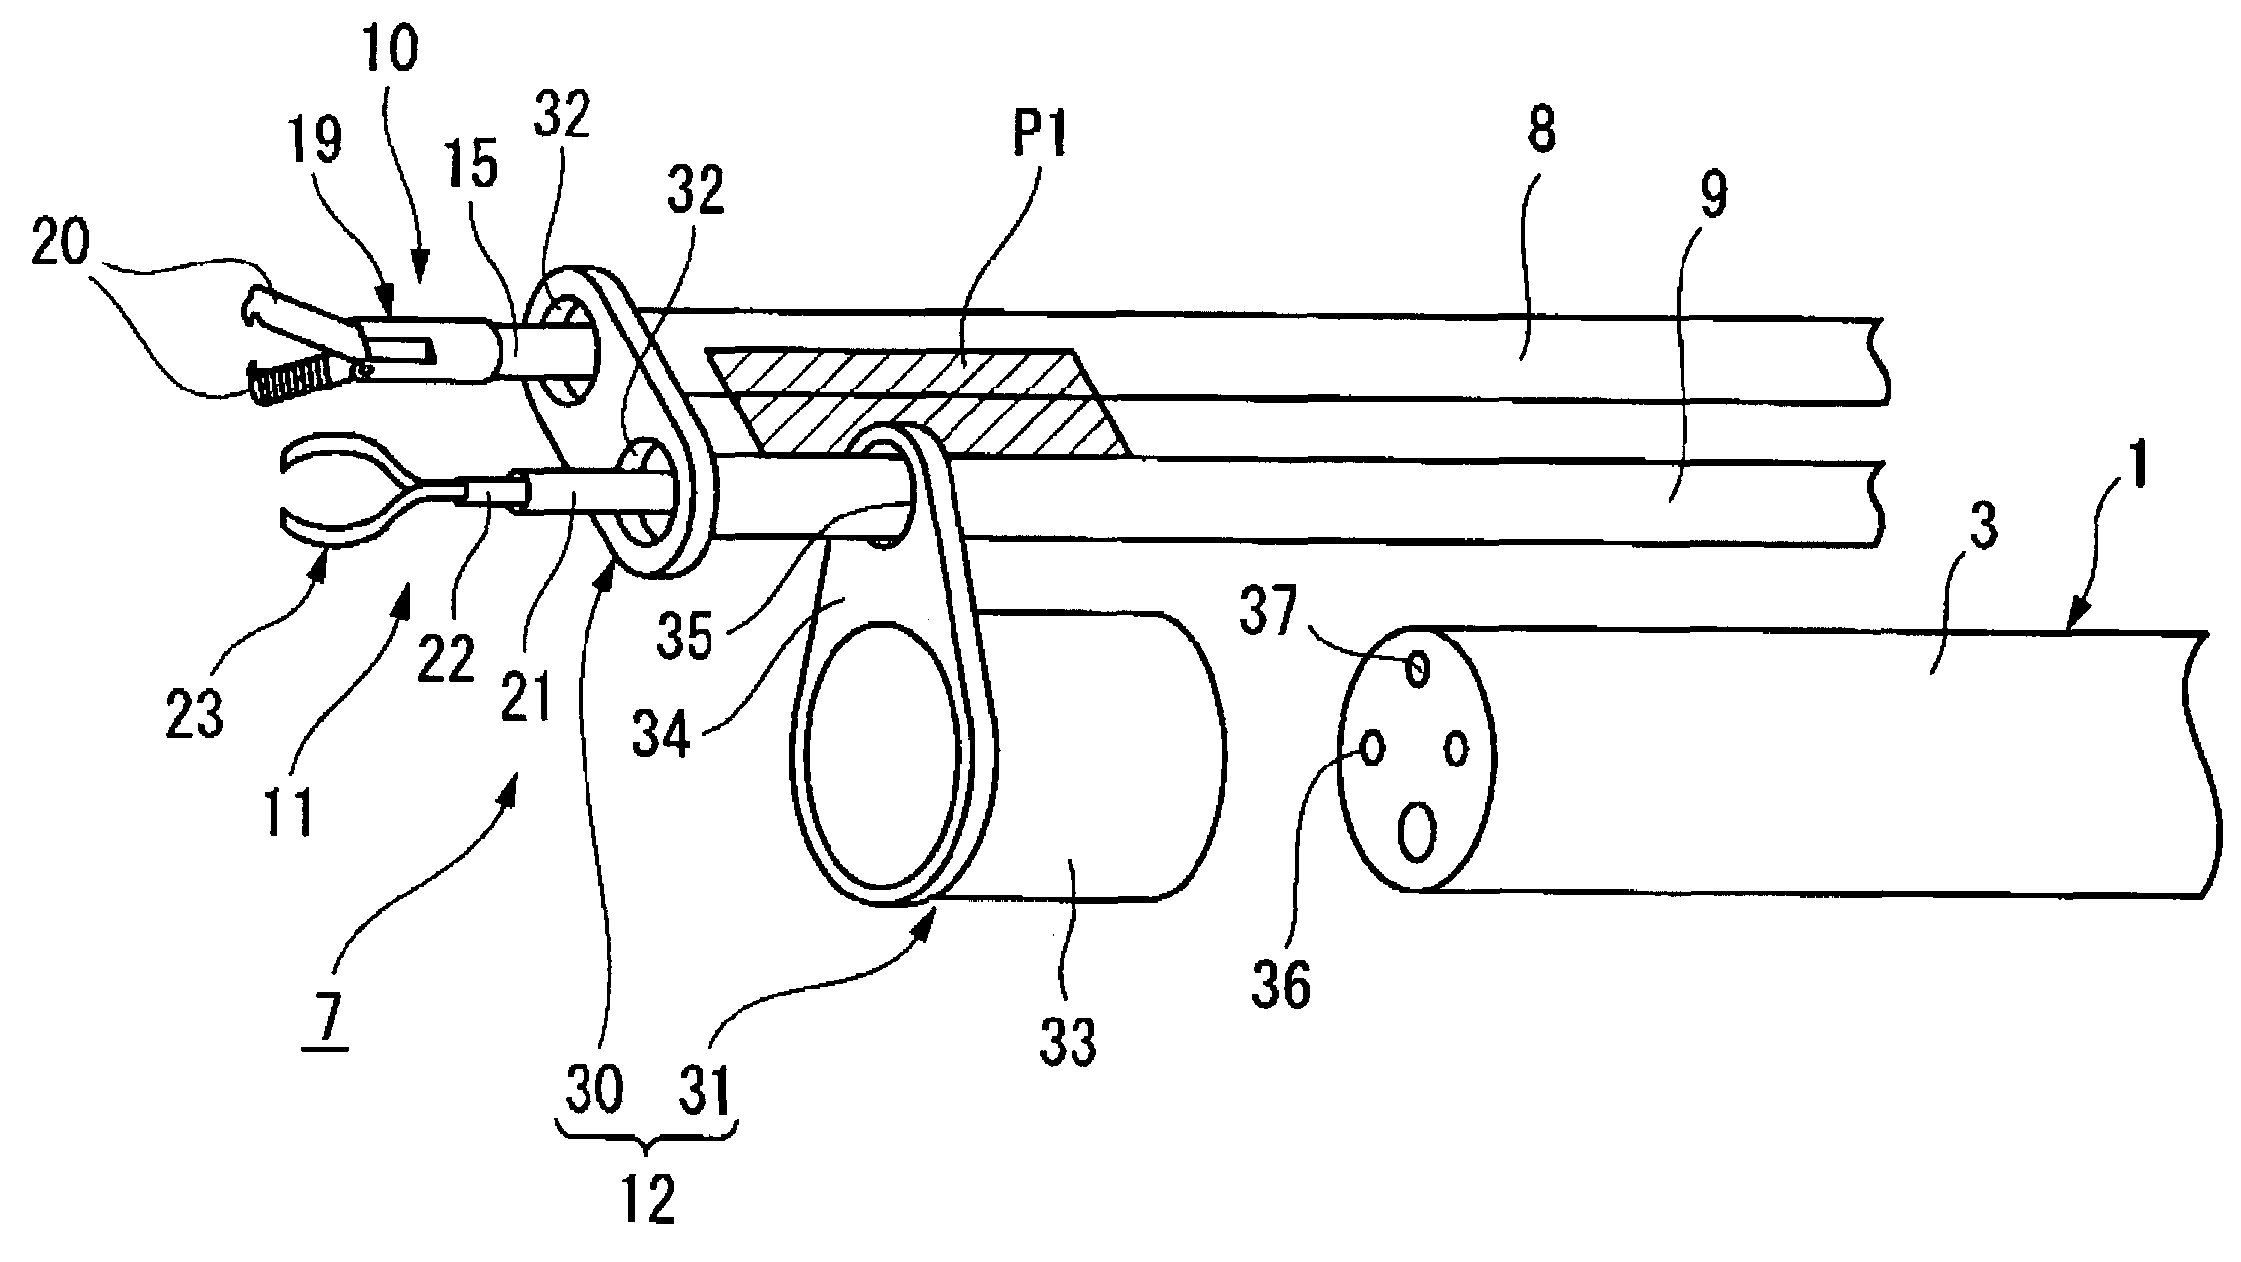 Endoscopic treatment instrument, endoscopic treatment system and supporting adaptor